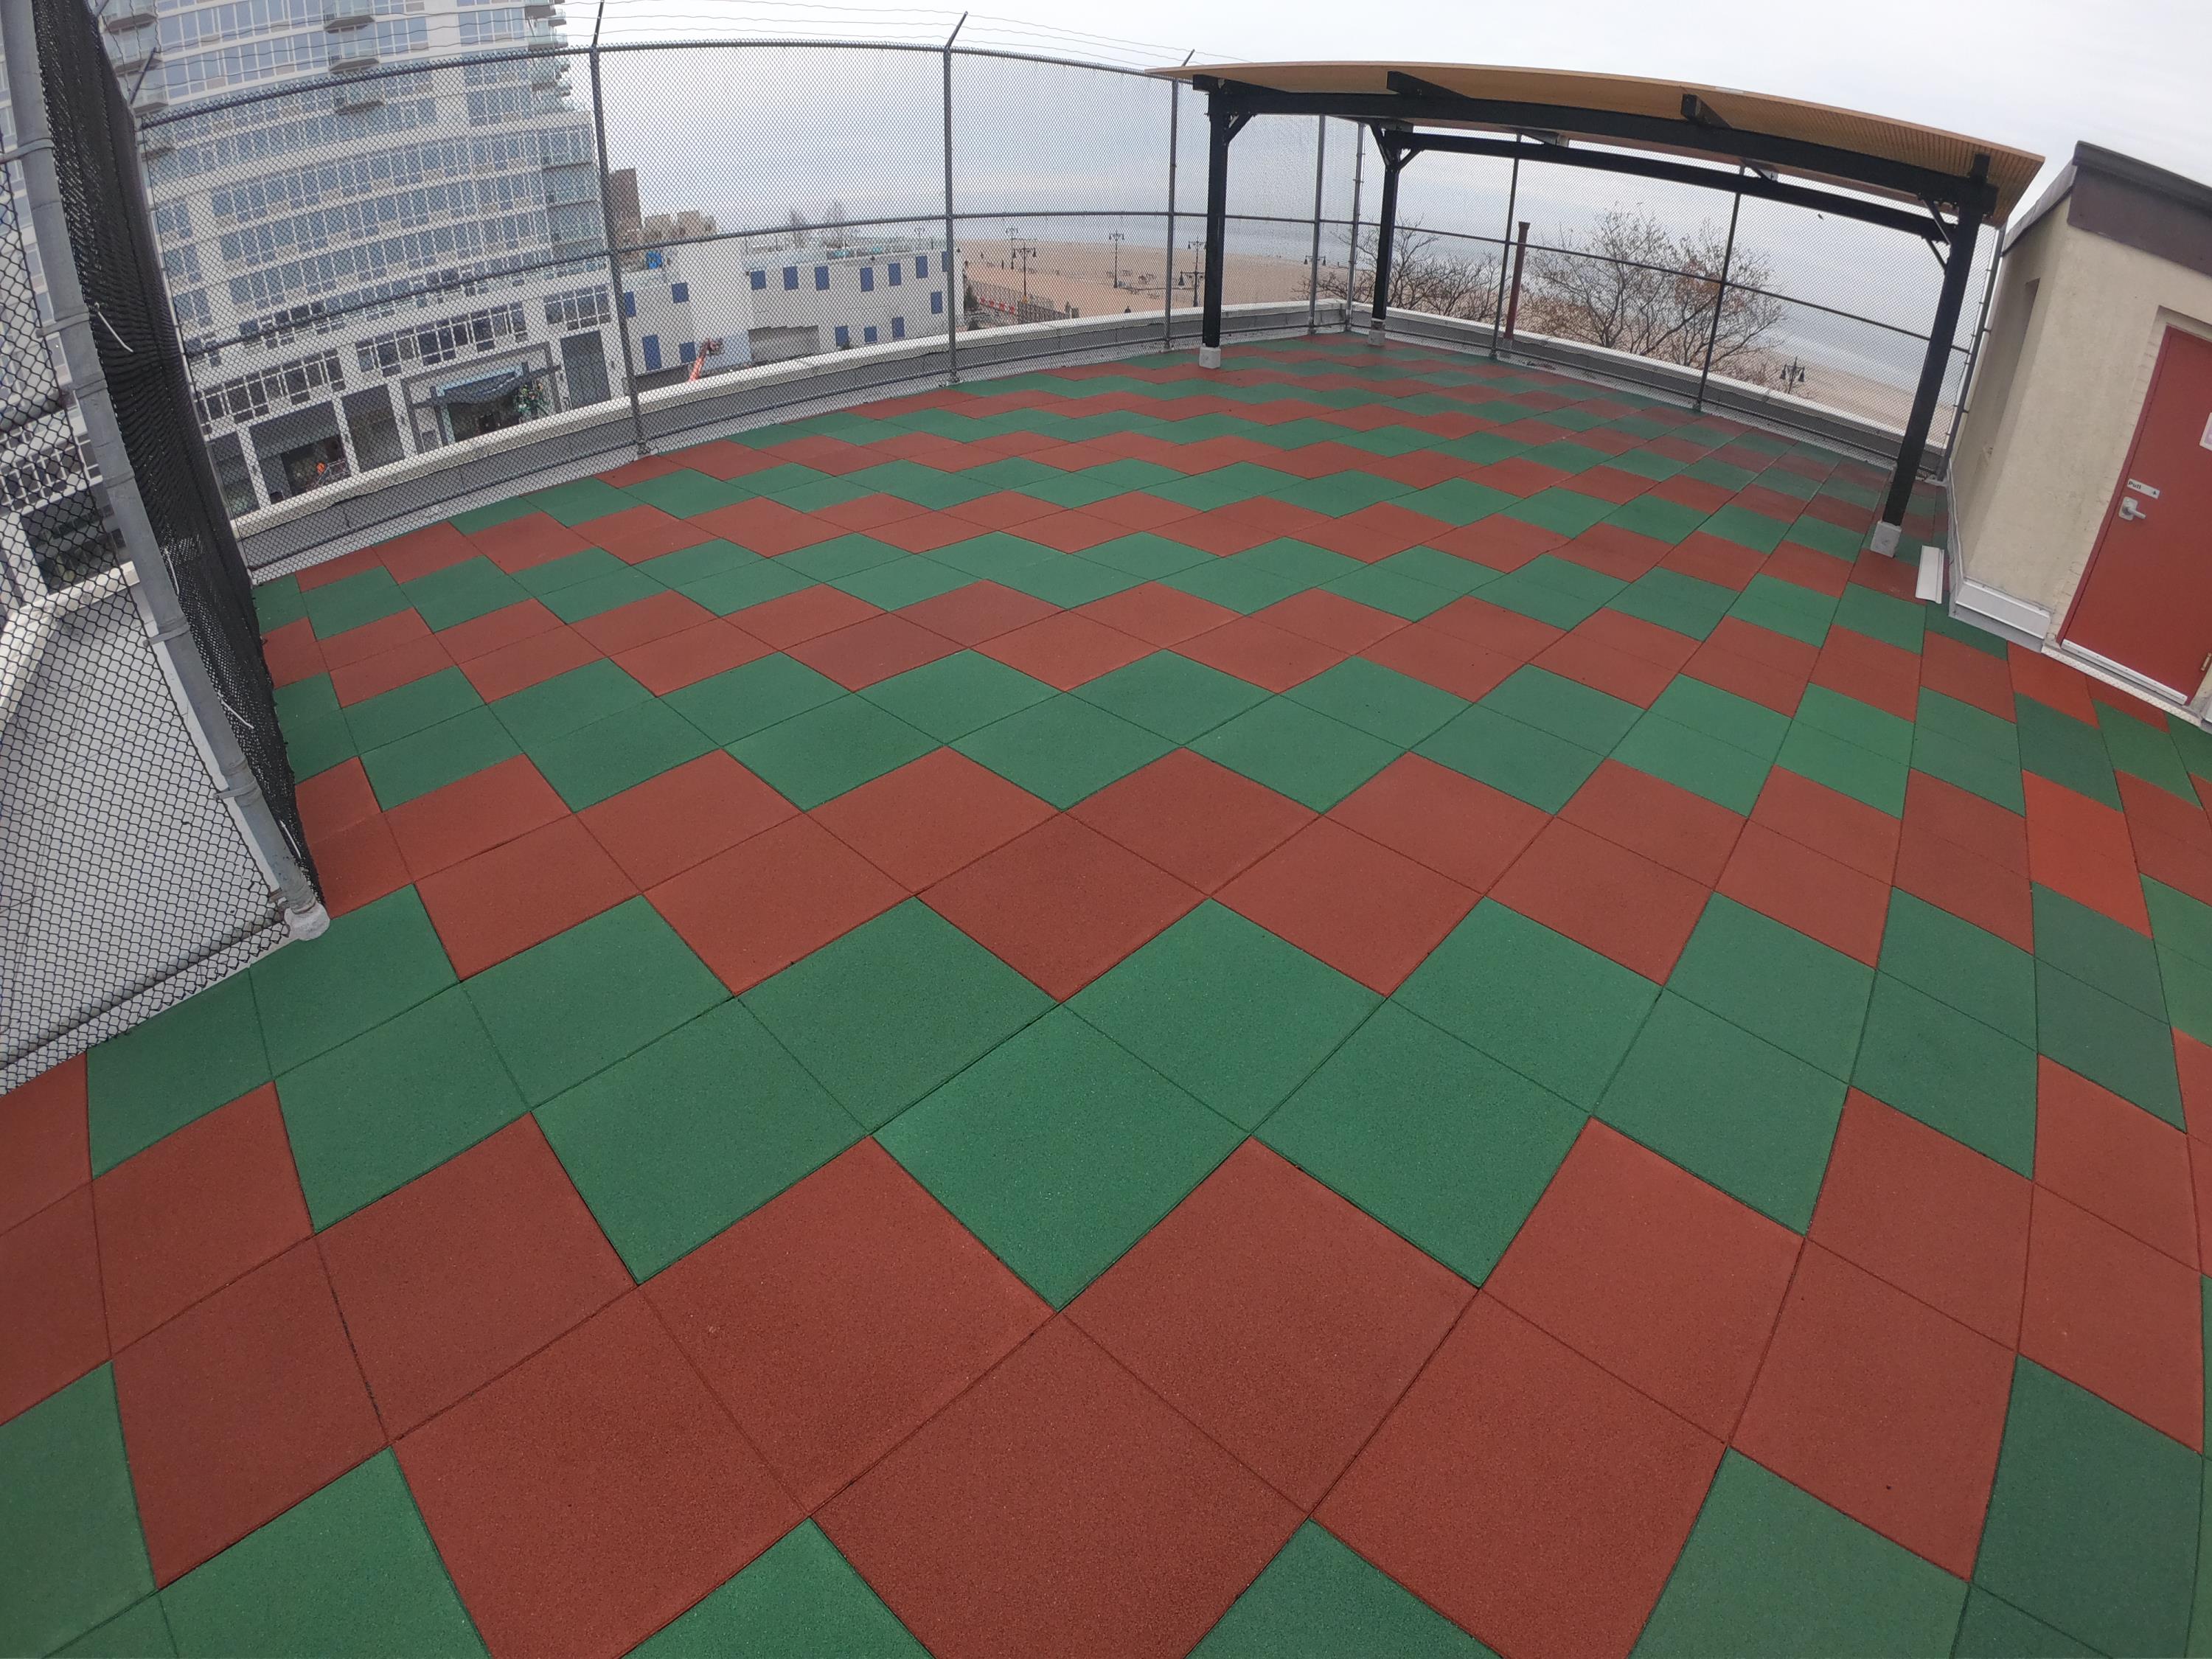 UNITY Surfacing - Rubber Playground Tiles on Rooftop w/Designs